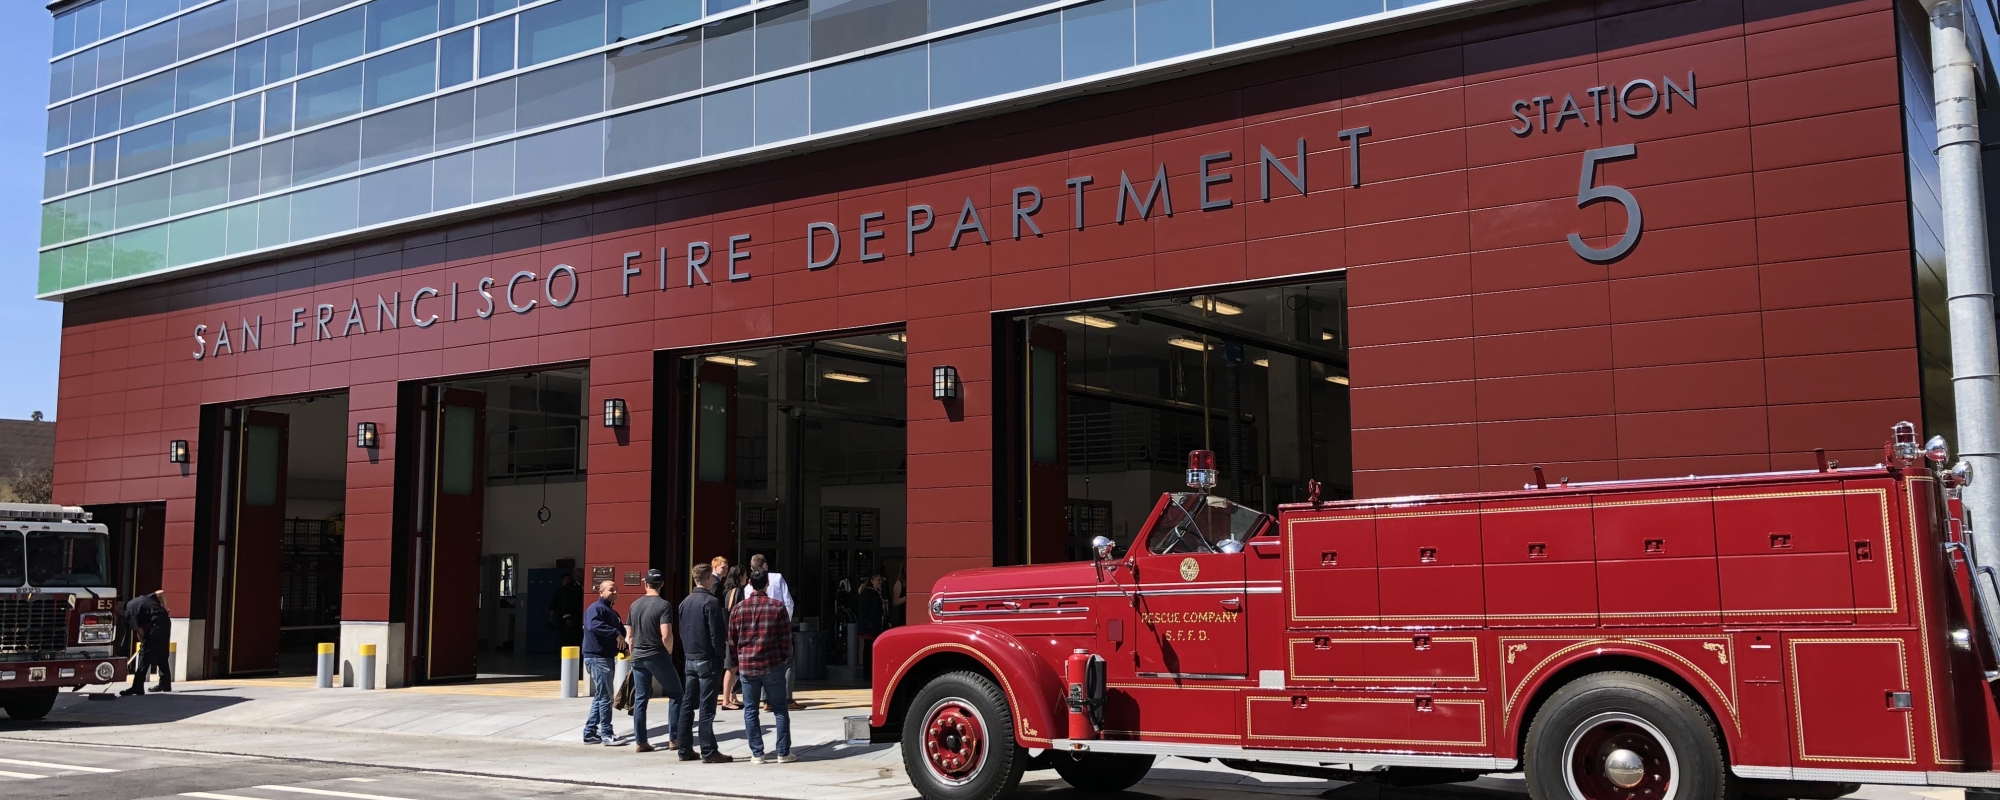 Construction for the new Fire Station 5 was completed in April 2019.